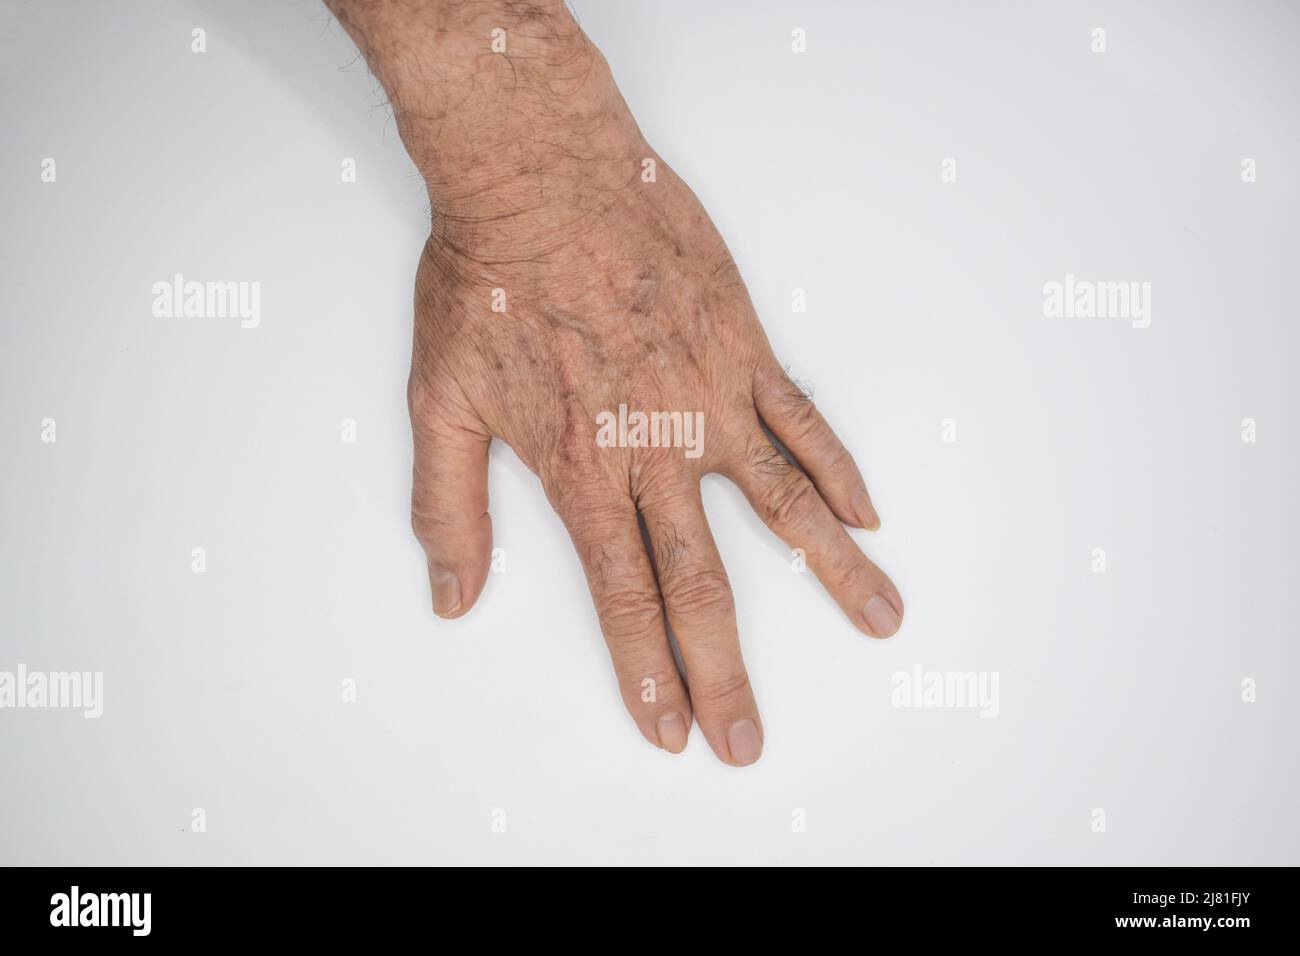 Spastic hand. Hand muscle spasticity. Concept of hand health. Stock Photo